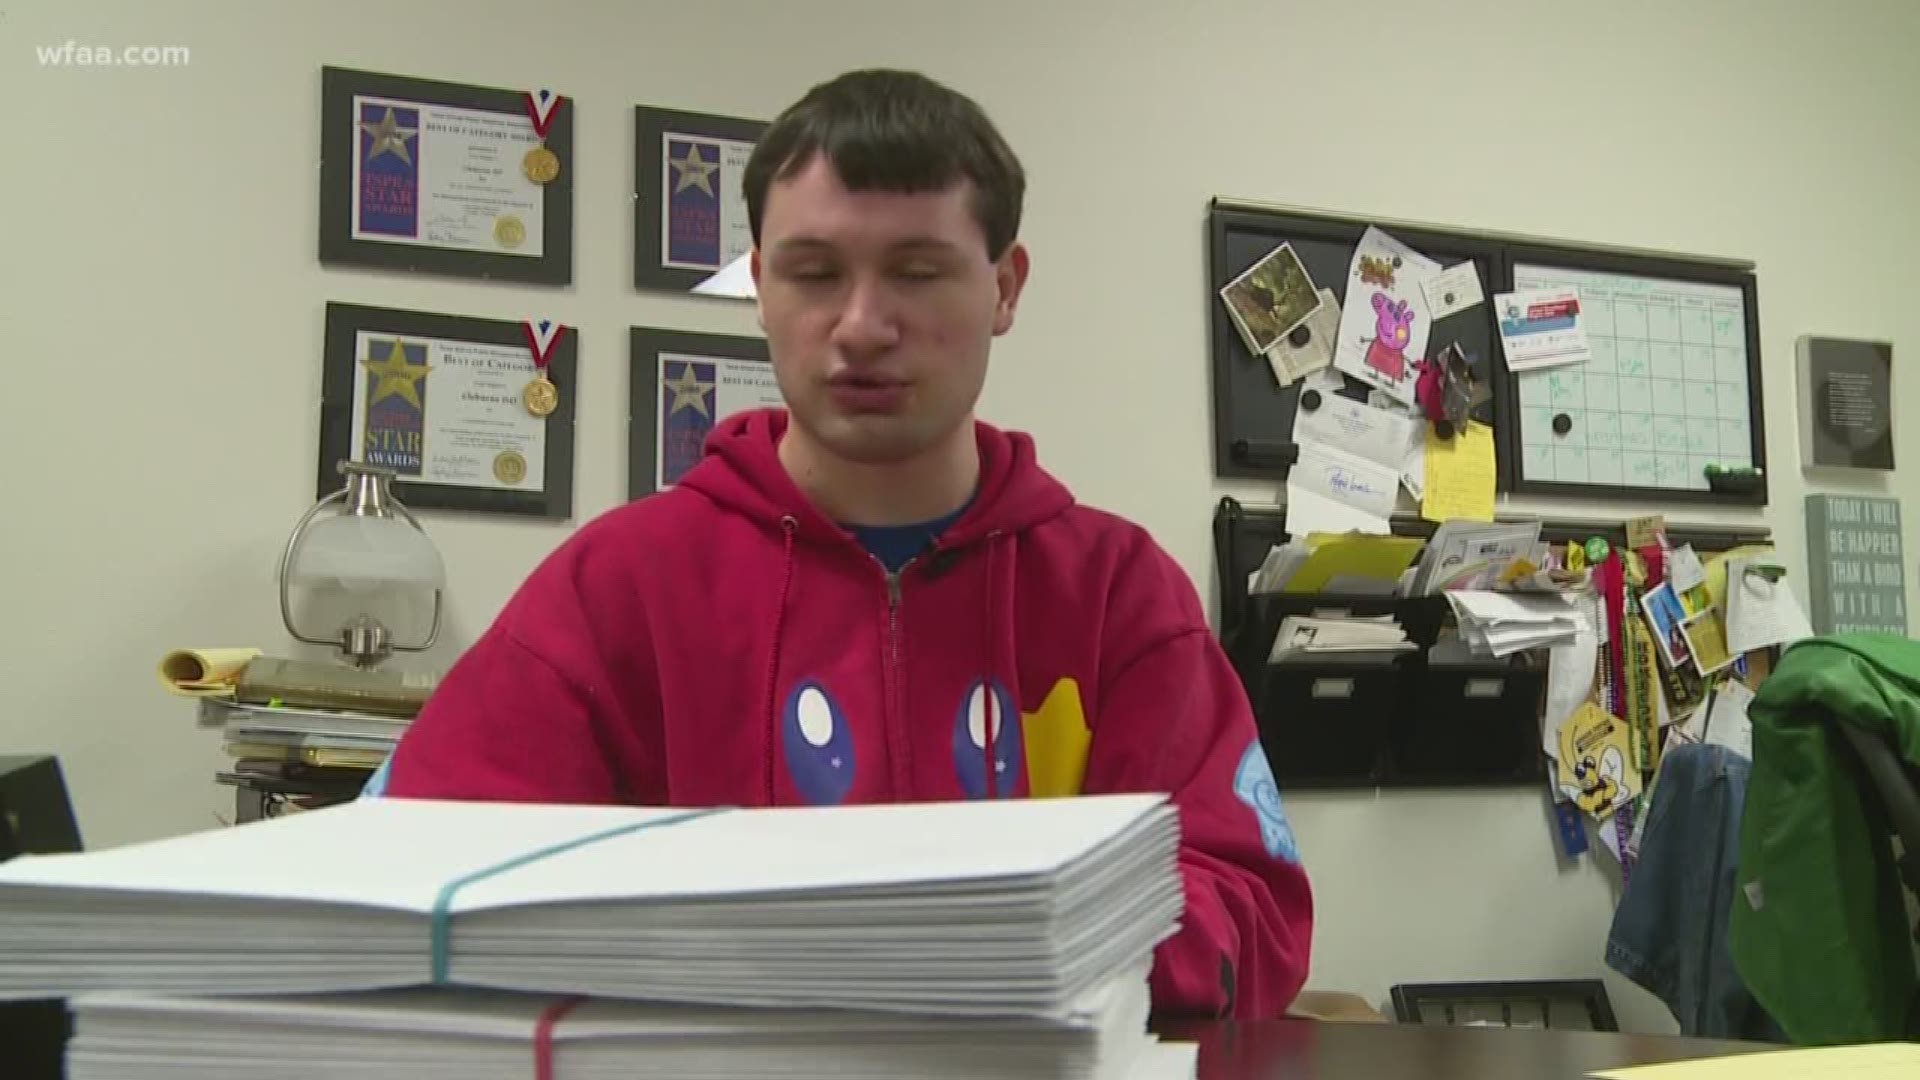 Every year, Matthew Conley sends a card to every teacher he’s ever had, totaling more than 5,000 over 12 years.